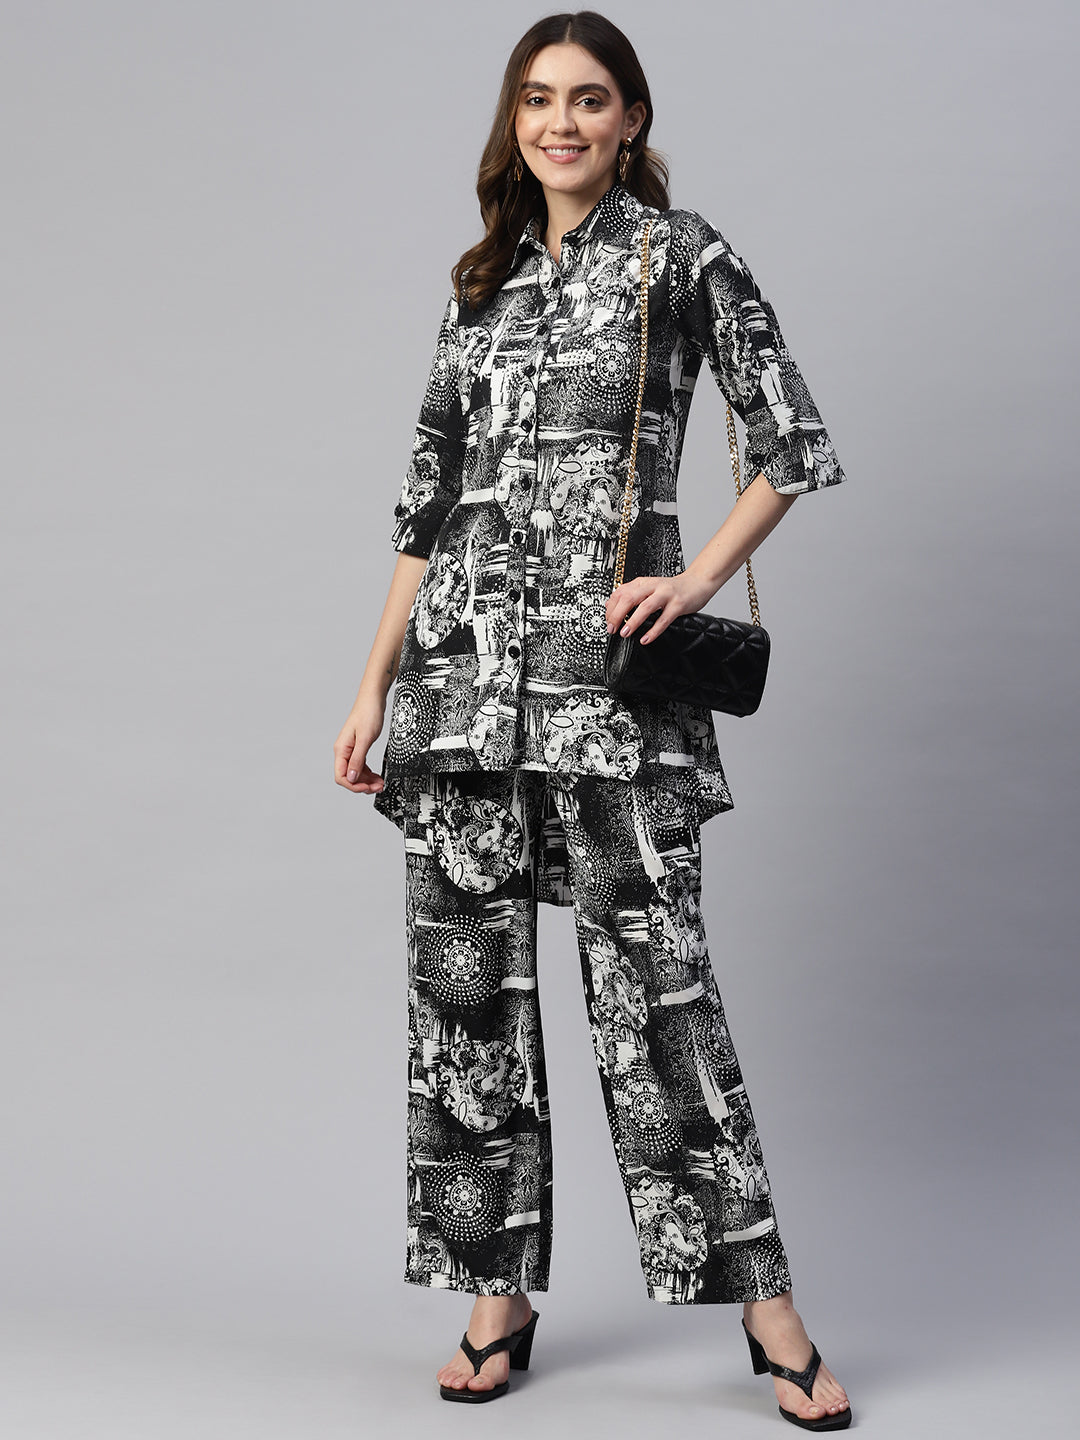 The Hunger Chinese Silk Slashed Panelled Top Suit Jacket and Trousers